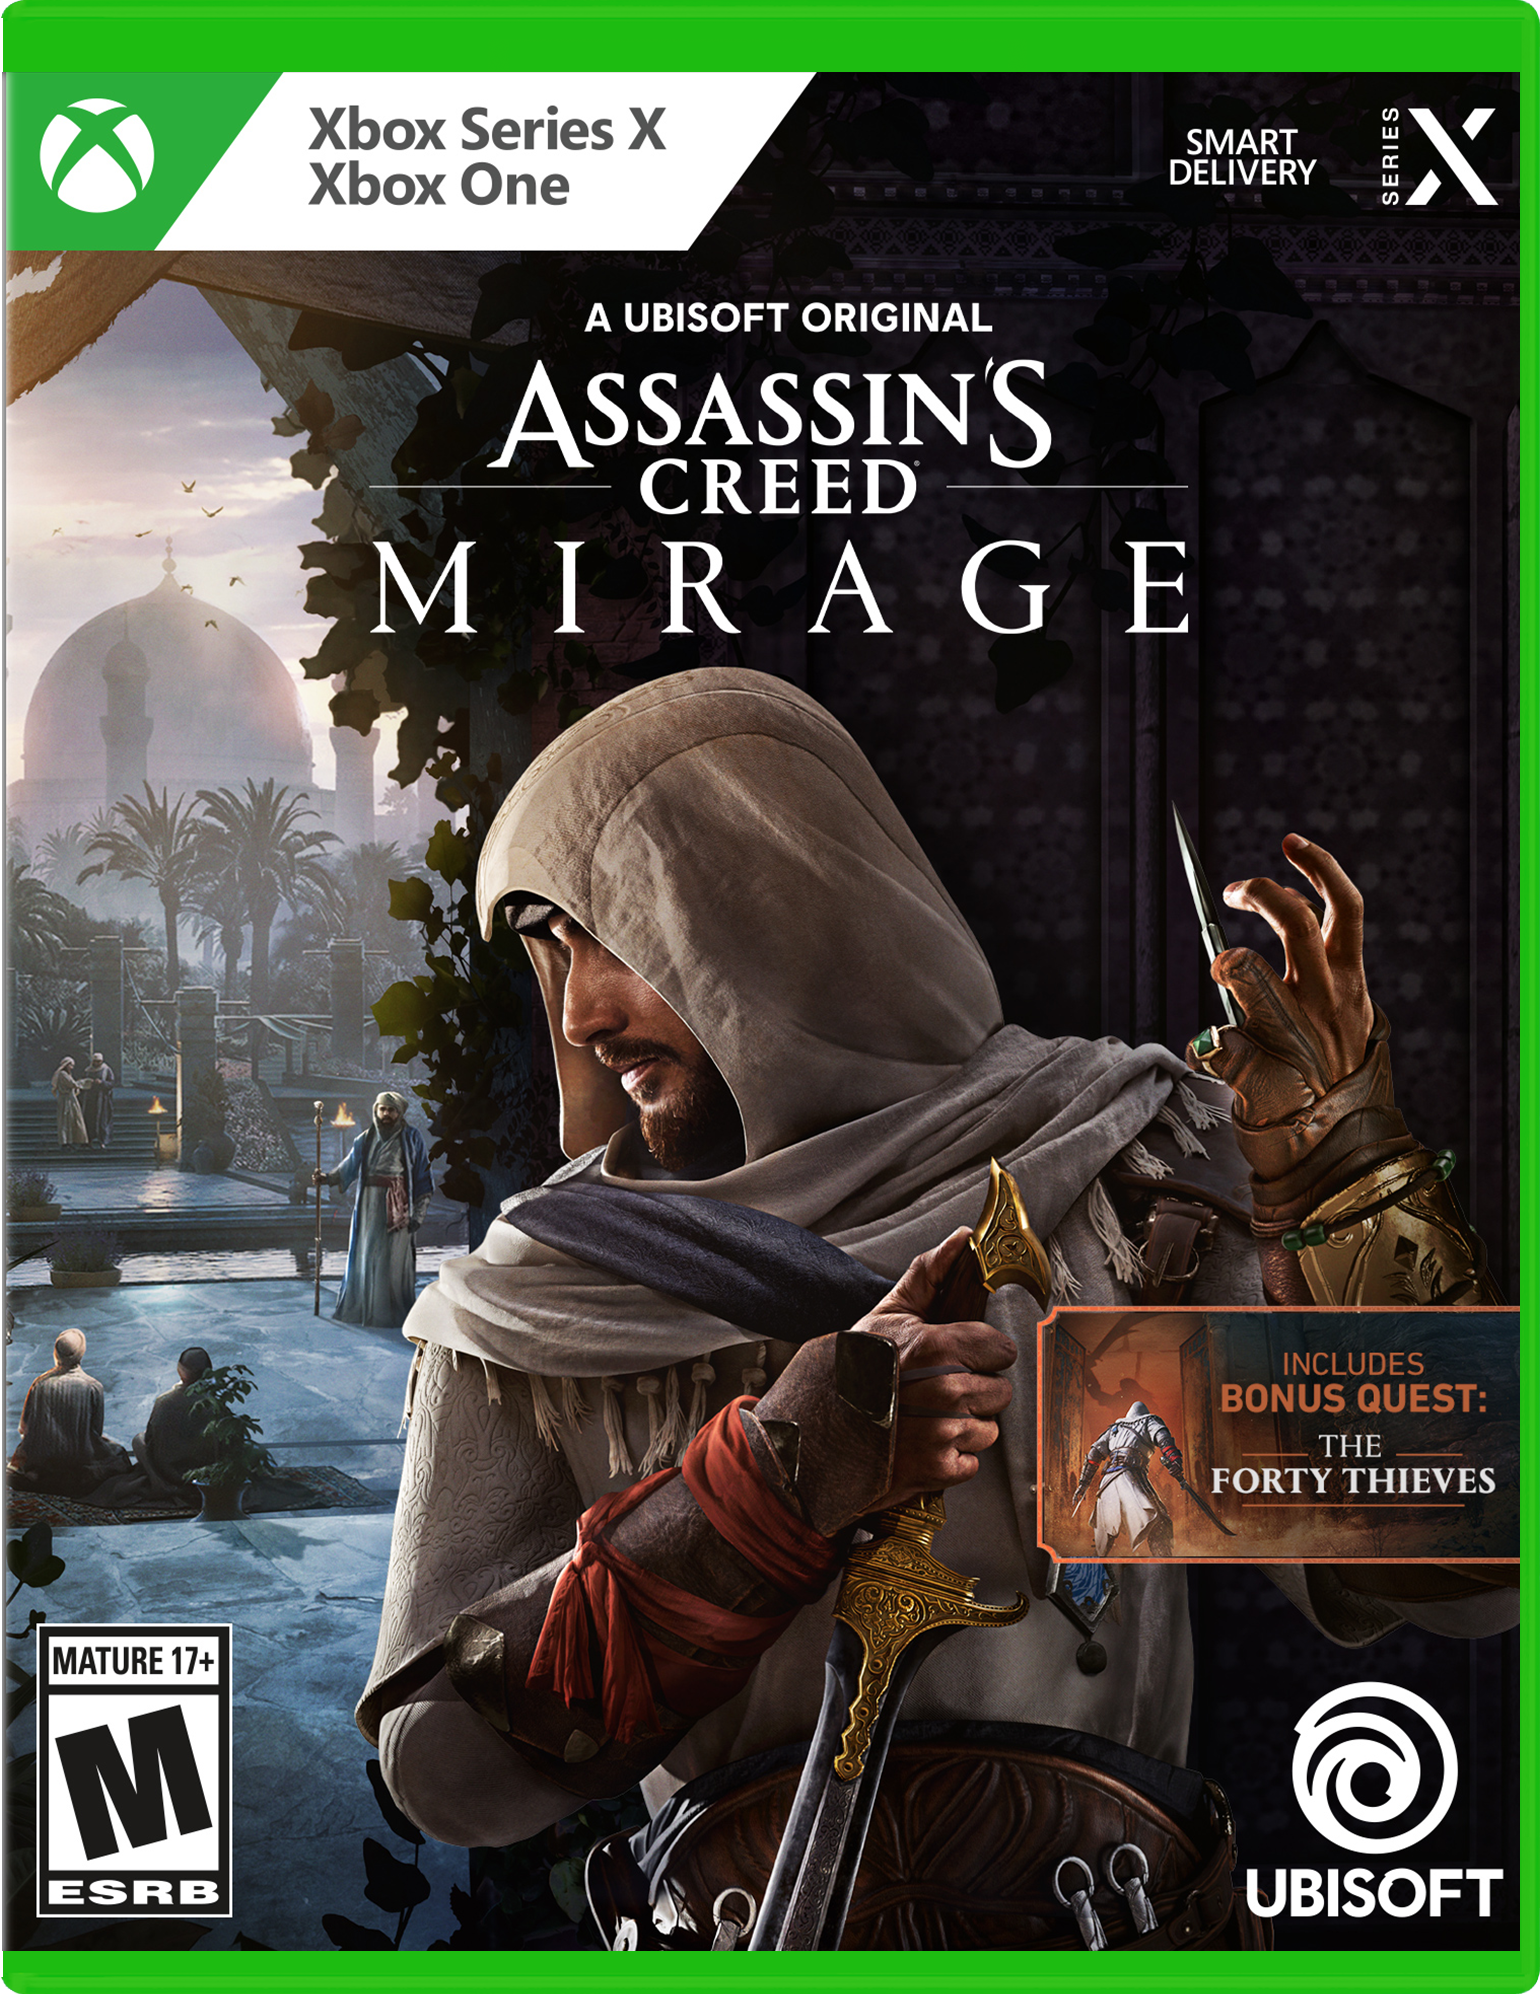 Assassin's Creed Mirage Master Assassin Edition - Xbox Series X